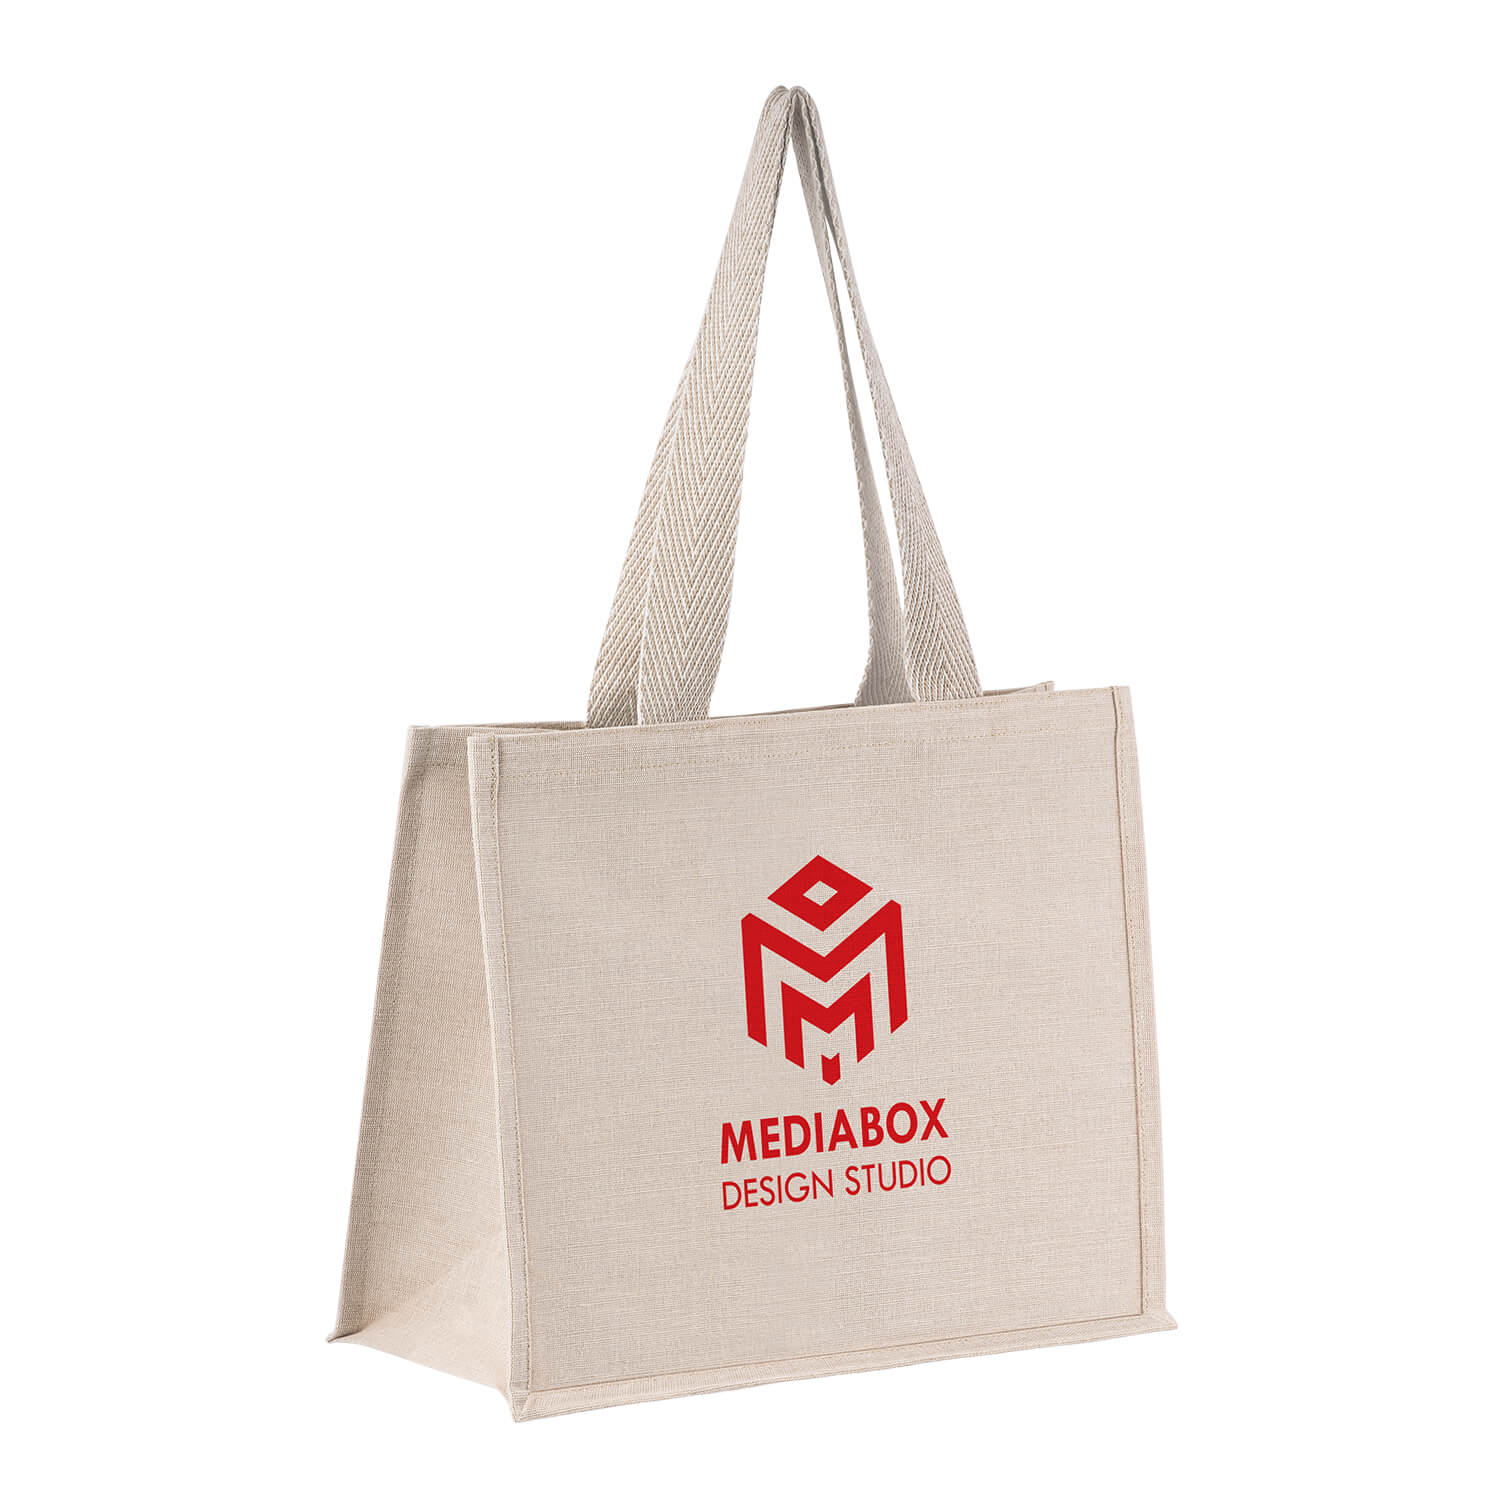 Branded Cotton Shopper & Canvas Bags in the UK